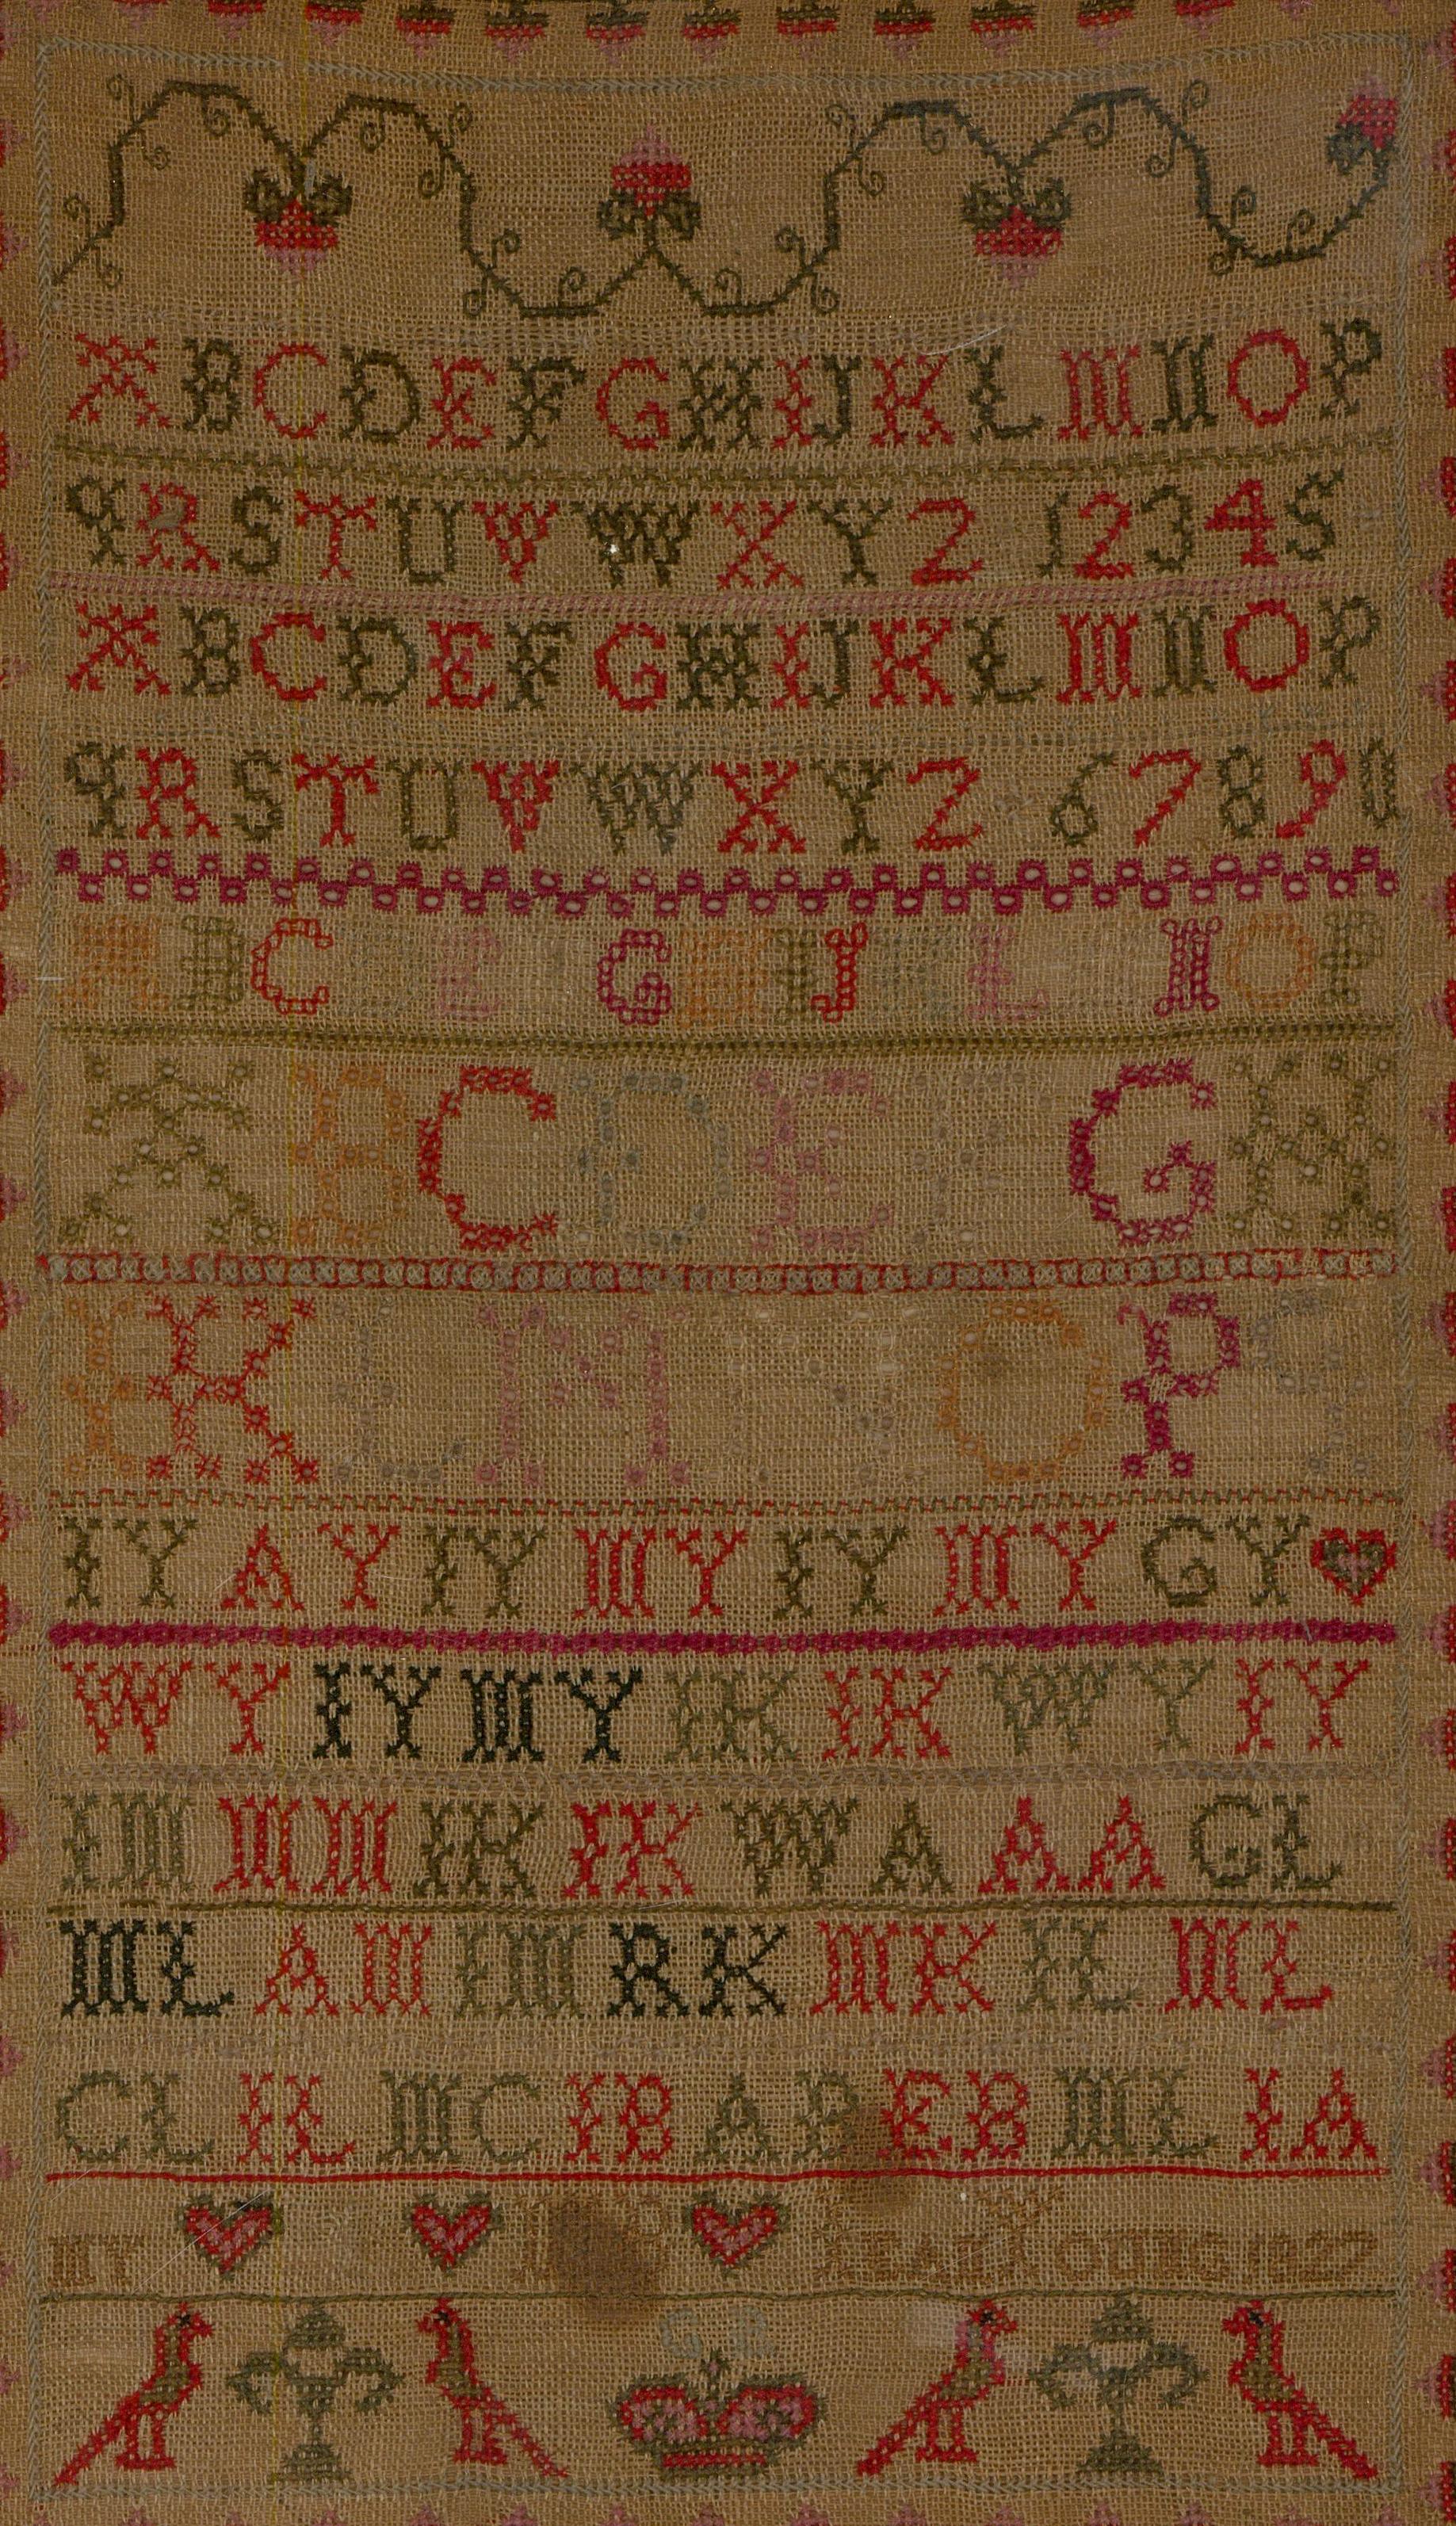 A beautiful George VI sampler, hand embroidered by Leah Young in 1827. Cases of the alphabet, birds and heart motifs have all been created from open stitch, cross stitch, and stem stitch techniques. Well-presented under glass in a black and gilt